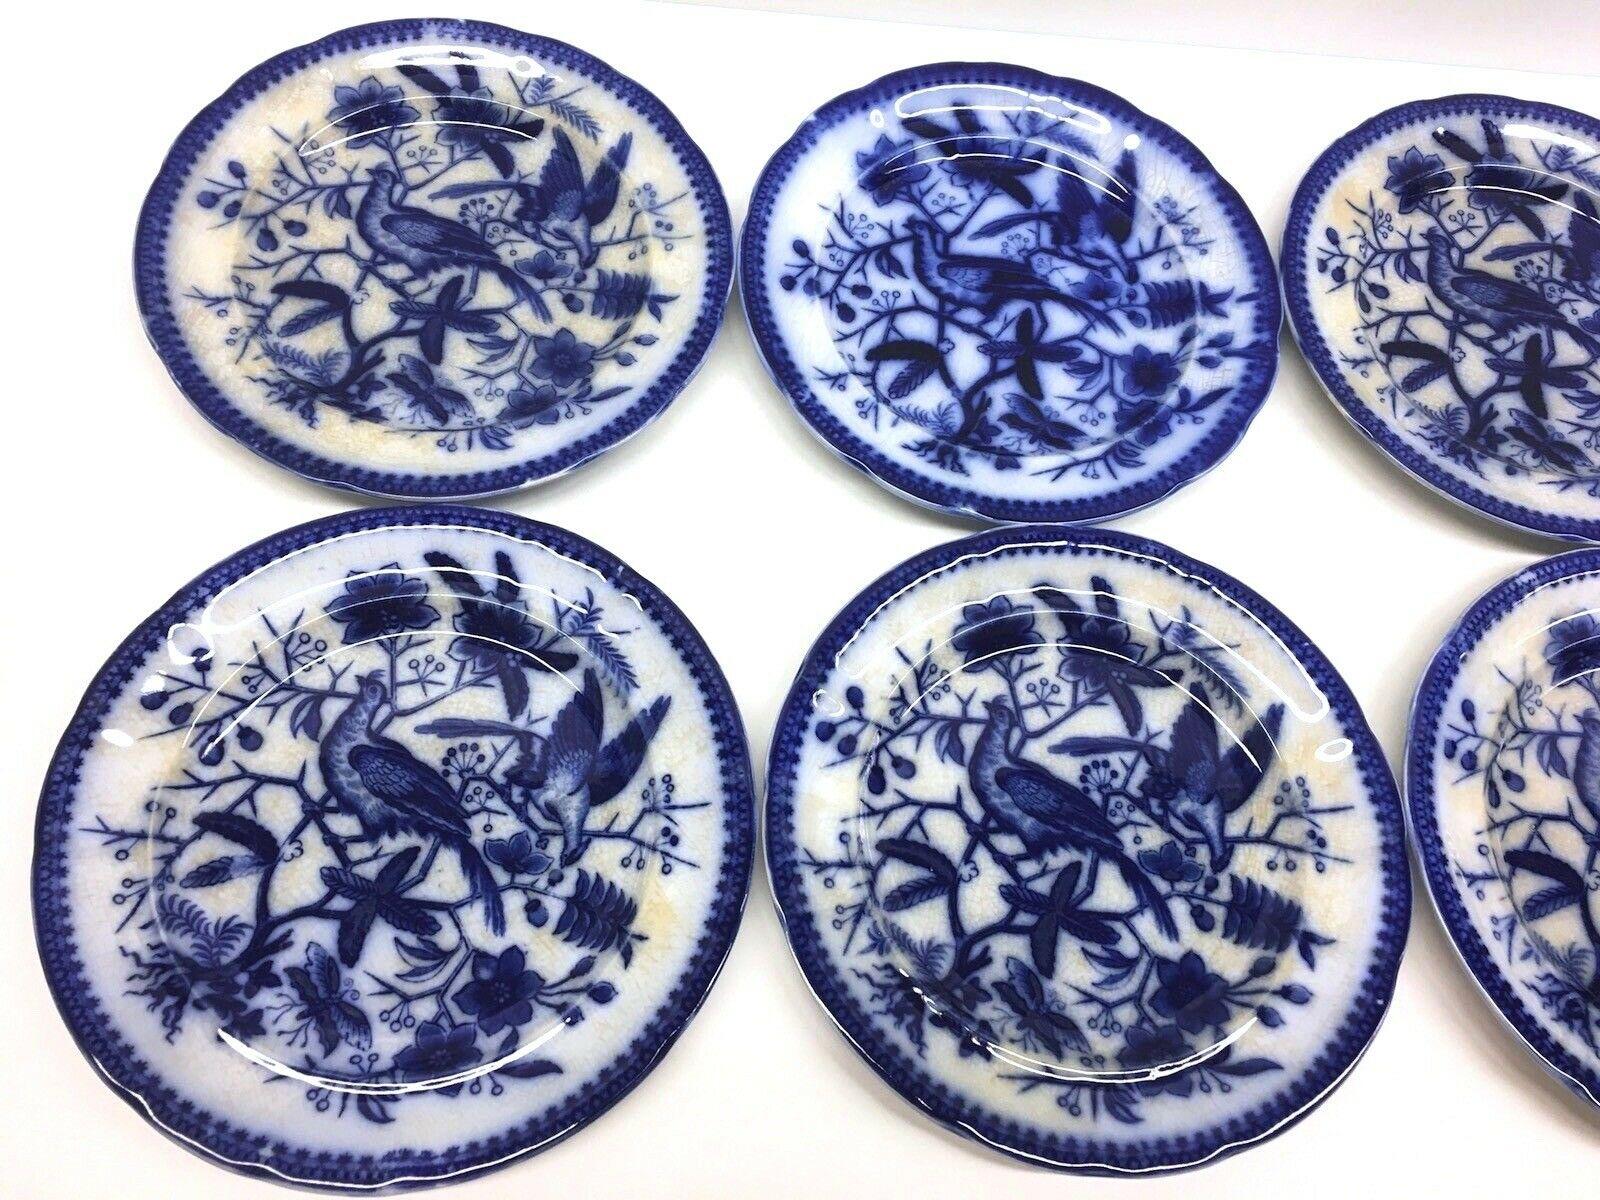 A set of six porcelain flow blue plates, made by Villeroy & Boch, Germany, circa 1890s or older.
Images show a hand painted Pheasant pattern. This is a set of six plates, very nice for your table. Signed on the base.